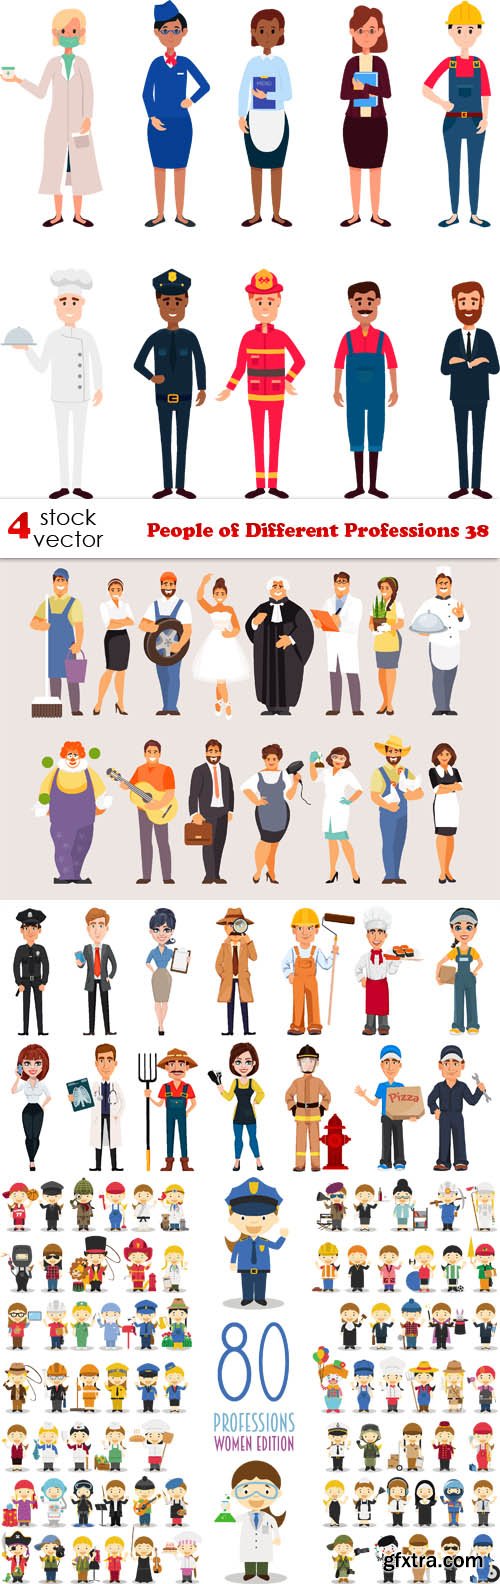 Vectors - People of Different Professions 38